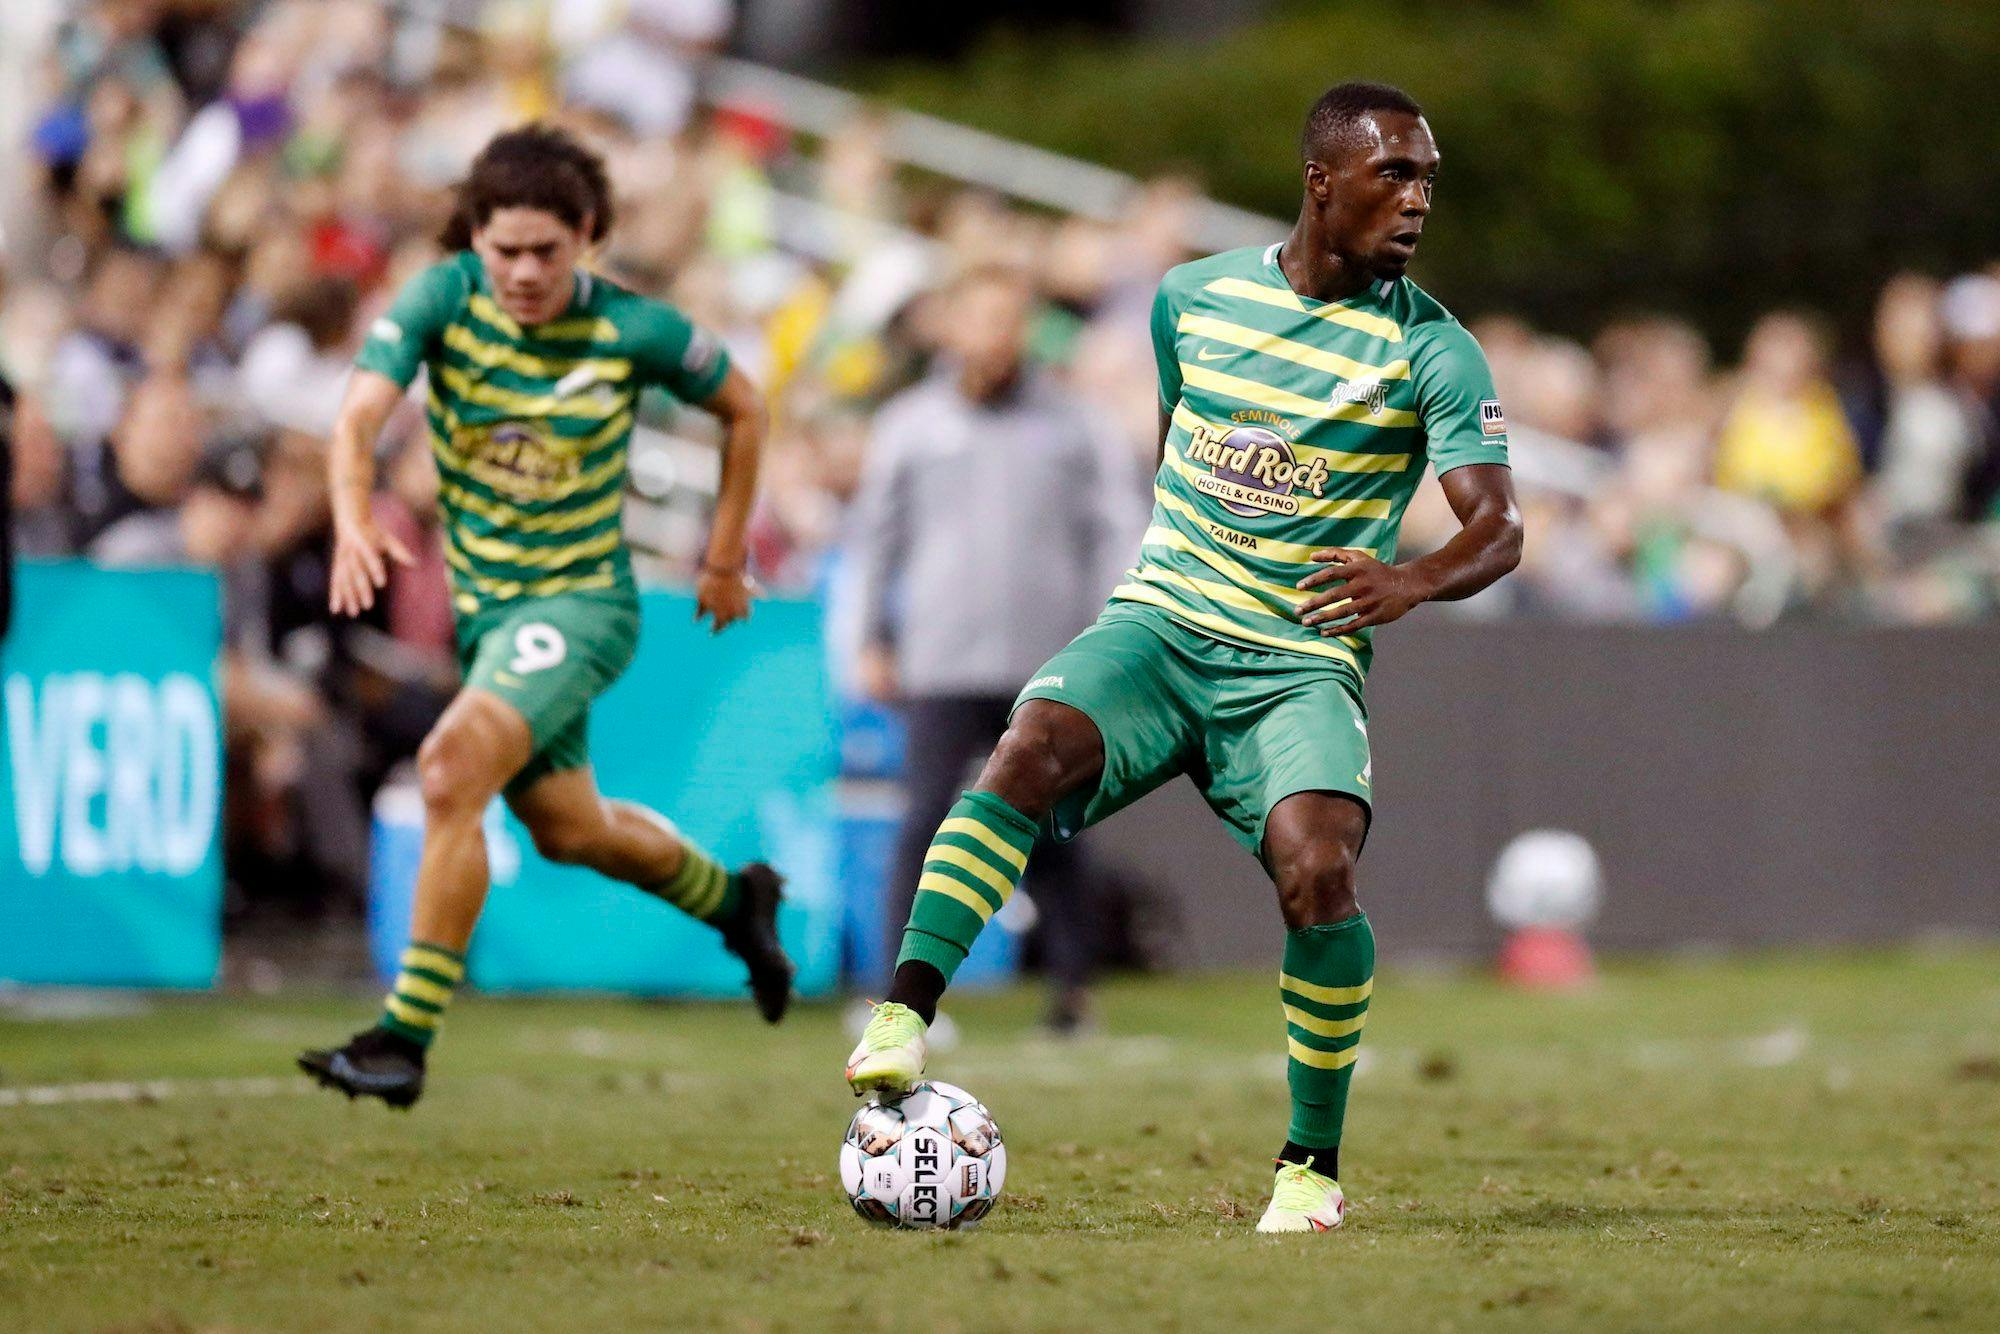 Rowdies Away to Orange County Preview